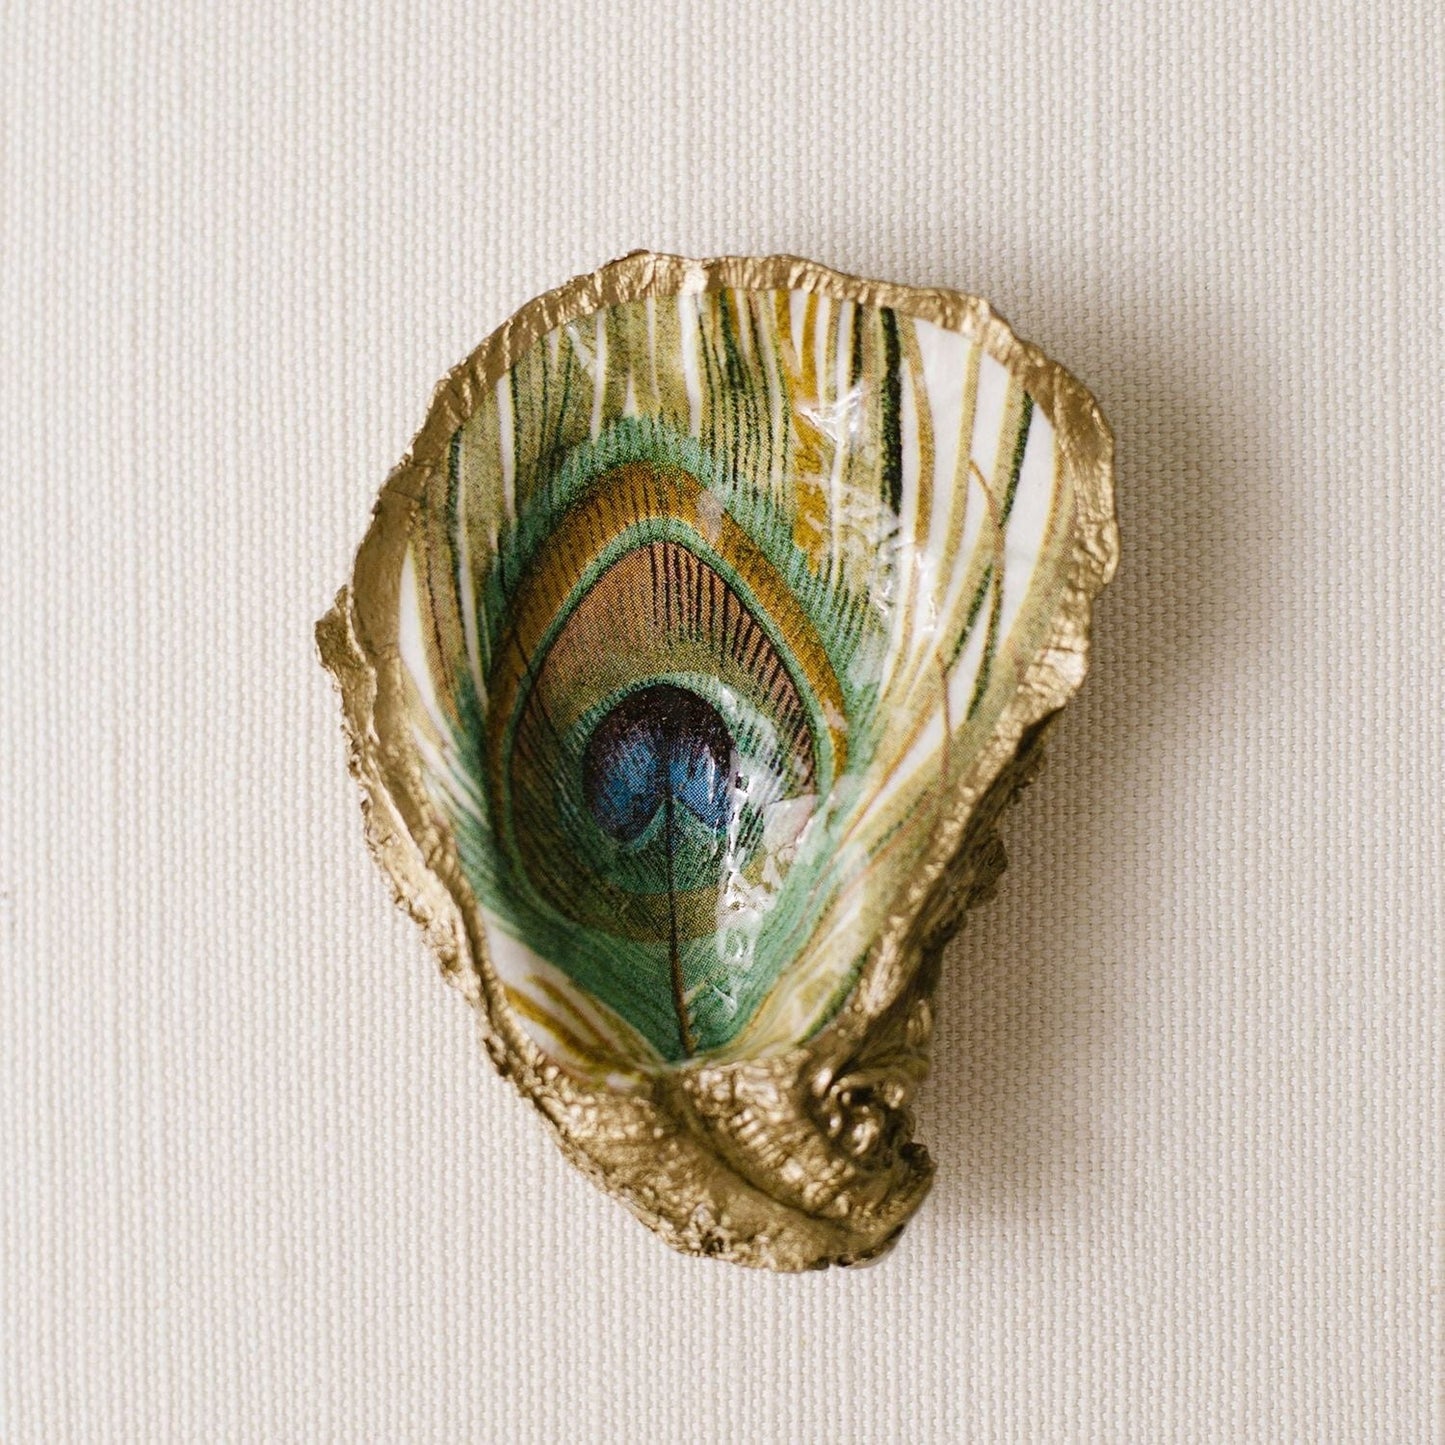 GIFT Decoupage Oyster Ring Dish - Peacock Feather